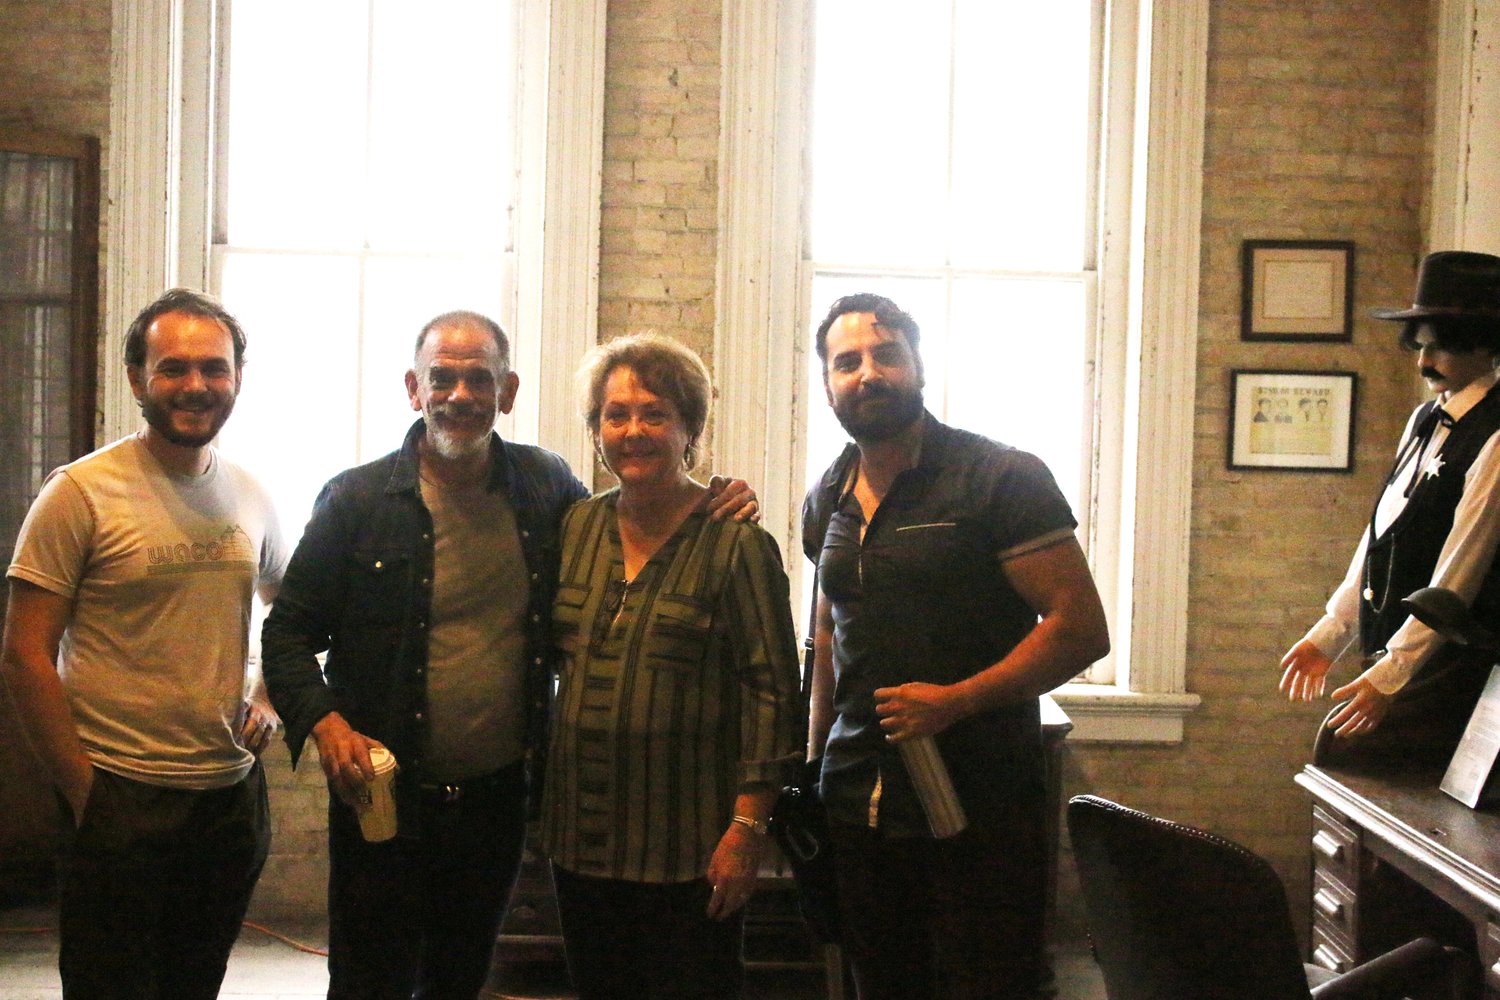 Actor and director Jon Chardiet, second from left, and members of his Texas crew, Max Wright, far left, and Stephen Pinkston, far right, met with Gonzales Jail Museum director Sandra Wolff to tour the old jail and scout places to film his upcoming Western, which will be shot on location from April 25-27.